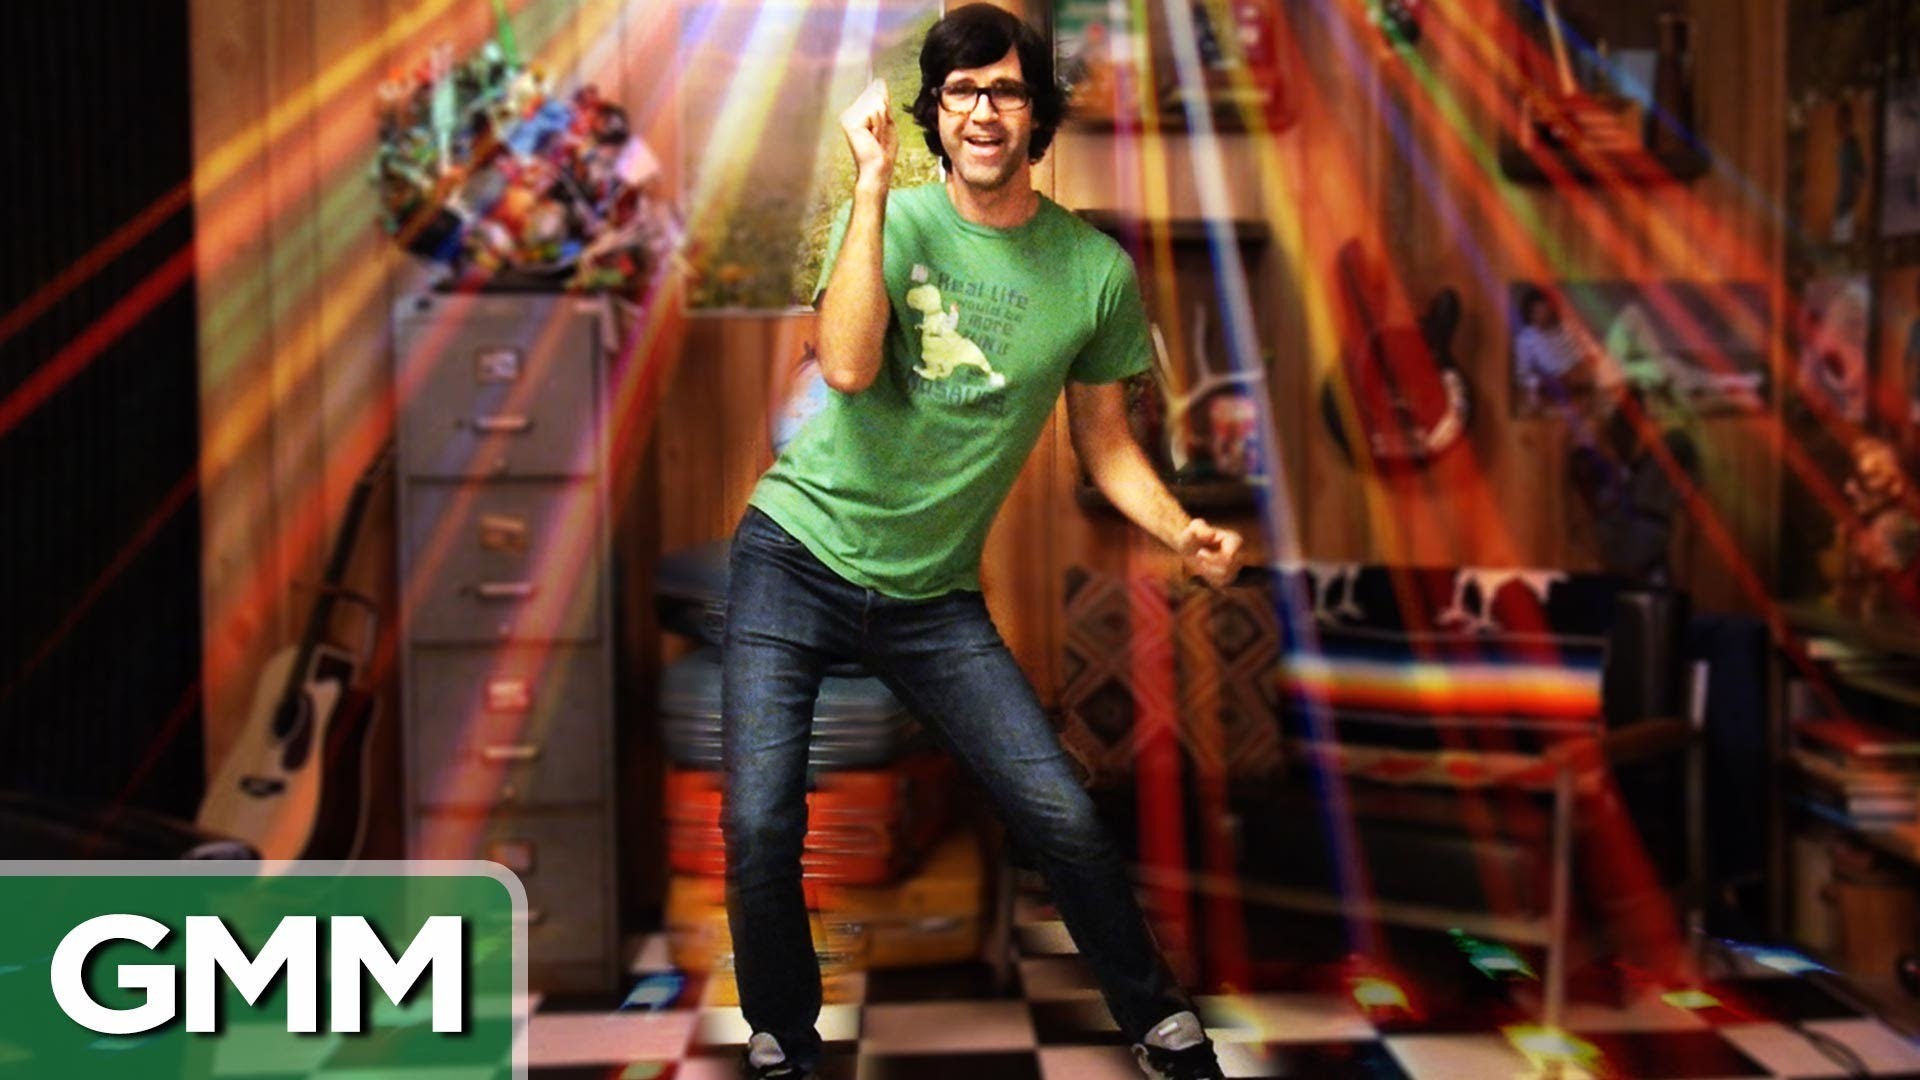 1920x1080 Good Mythical Morning by DarkDaydreamz on DeviantArt 0 HTML code. How to  Dance to Attract Girls - YouTube